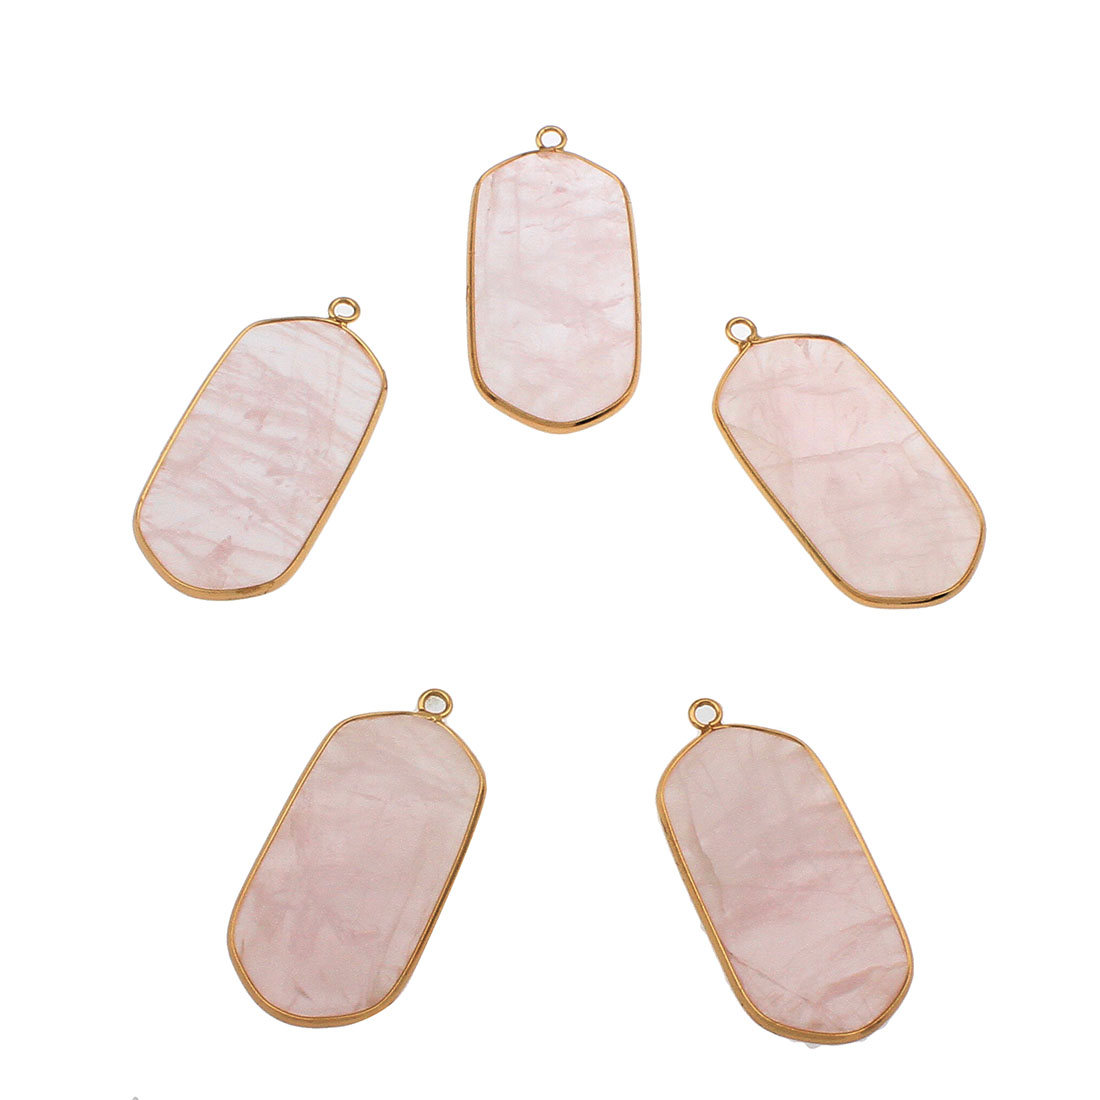 2 gold color plated with rose quartz